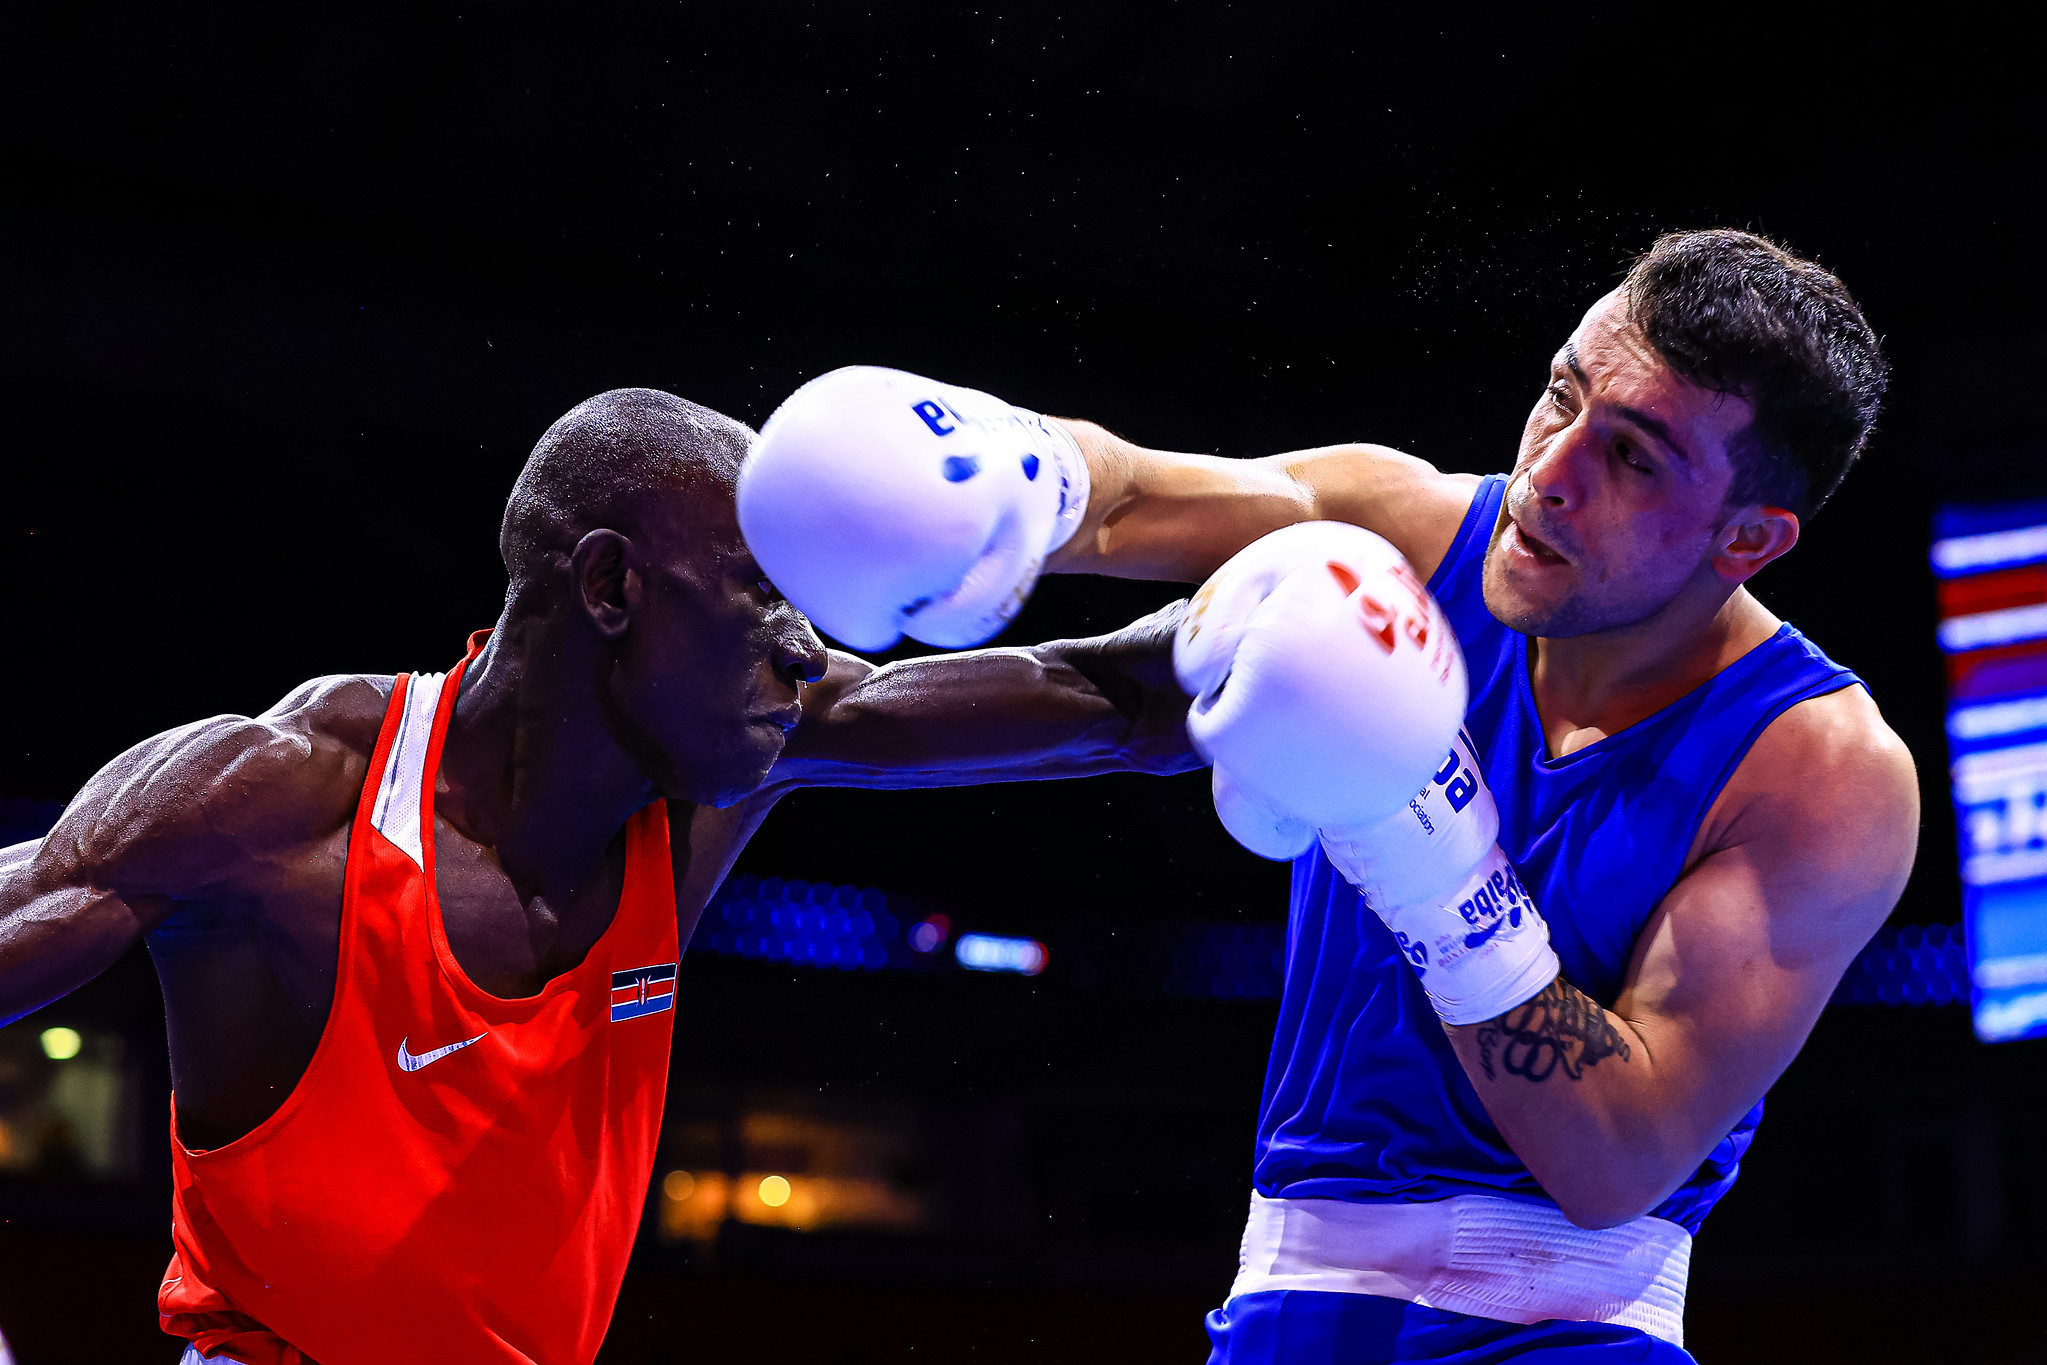 Suliman Aslami gave FCT its first win of the day by beating Kenya's Edwin Owuor ©AIBA